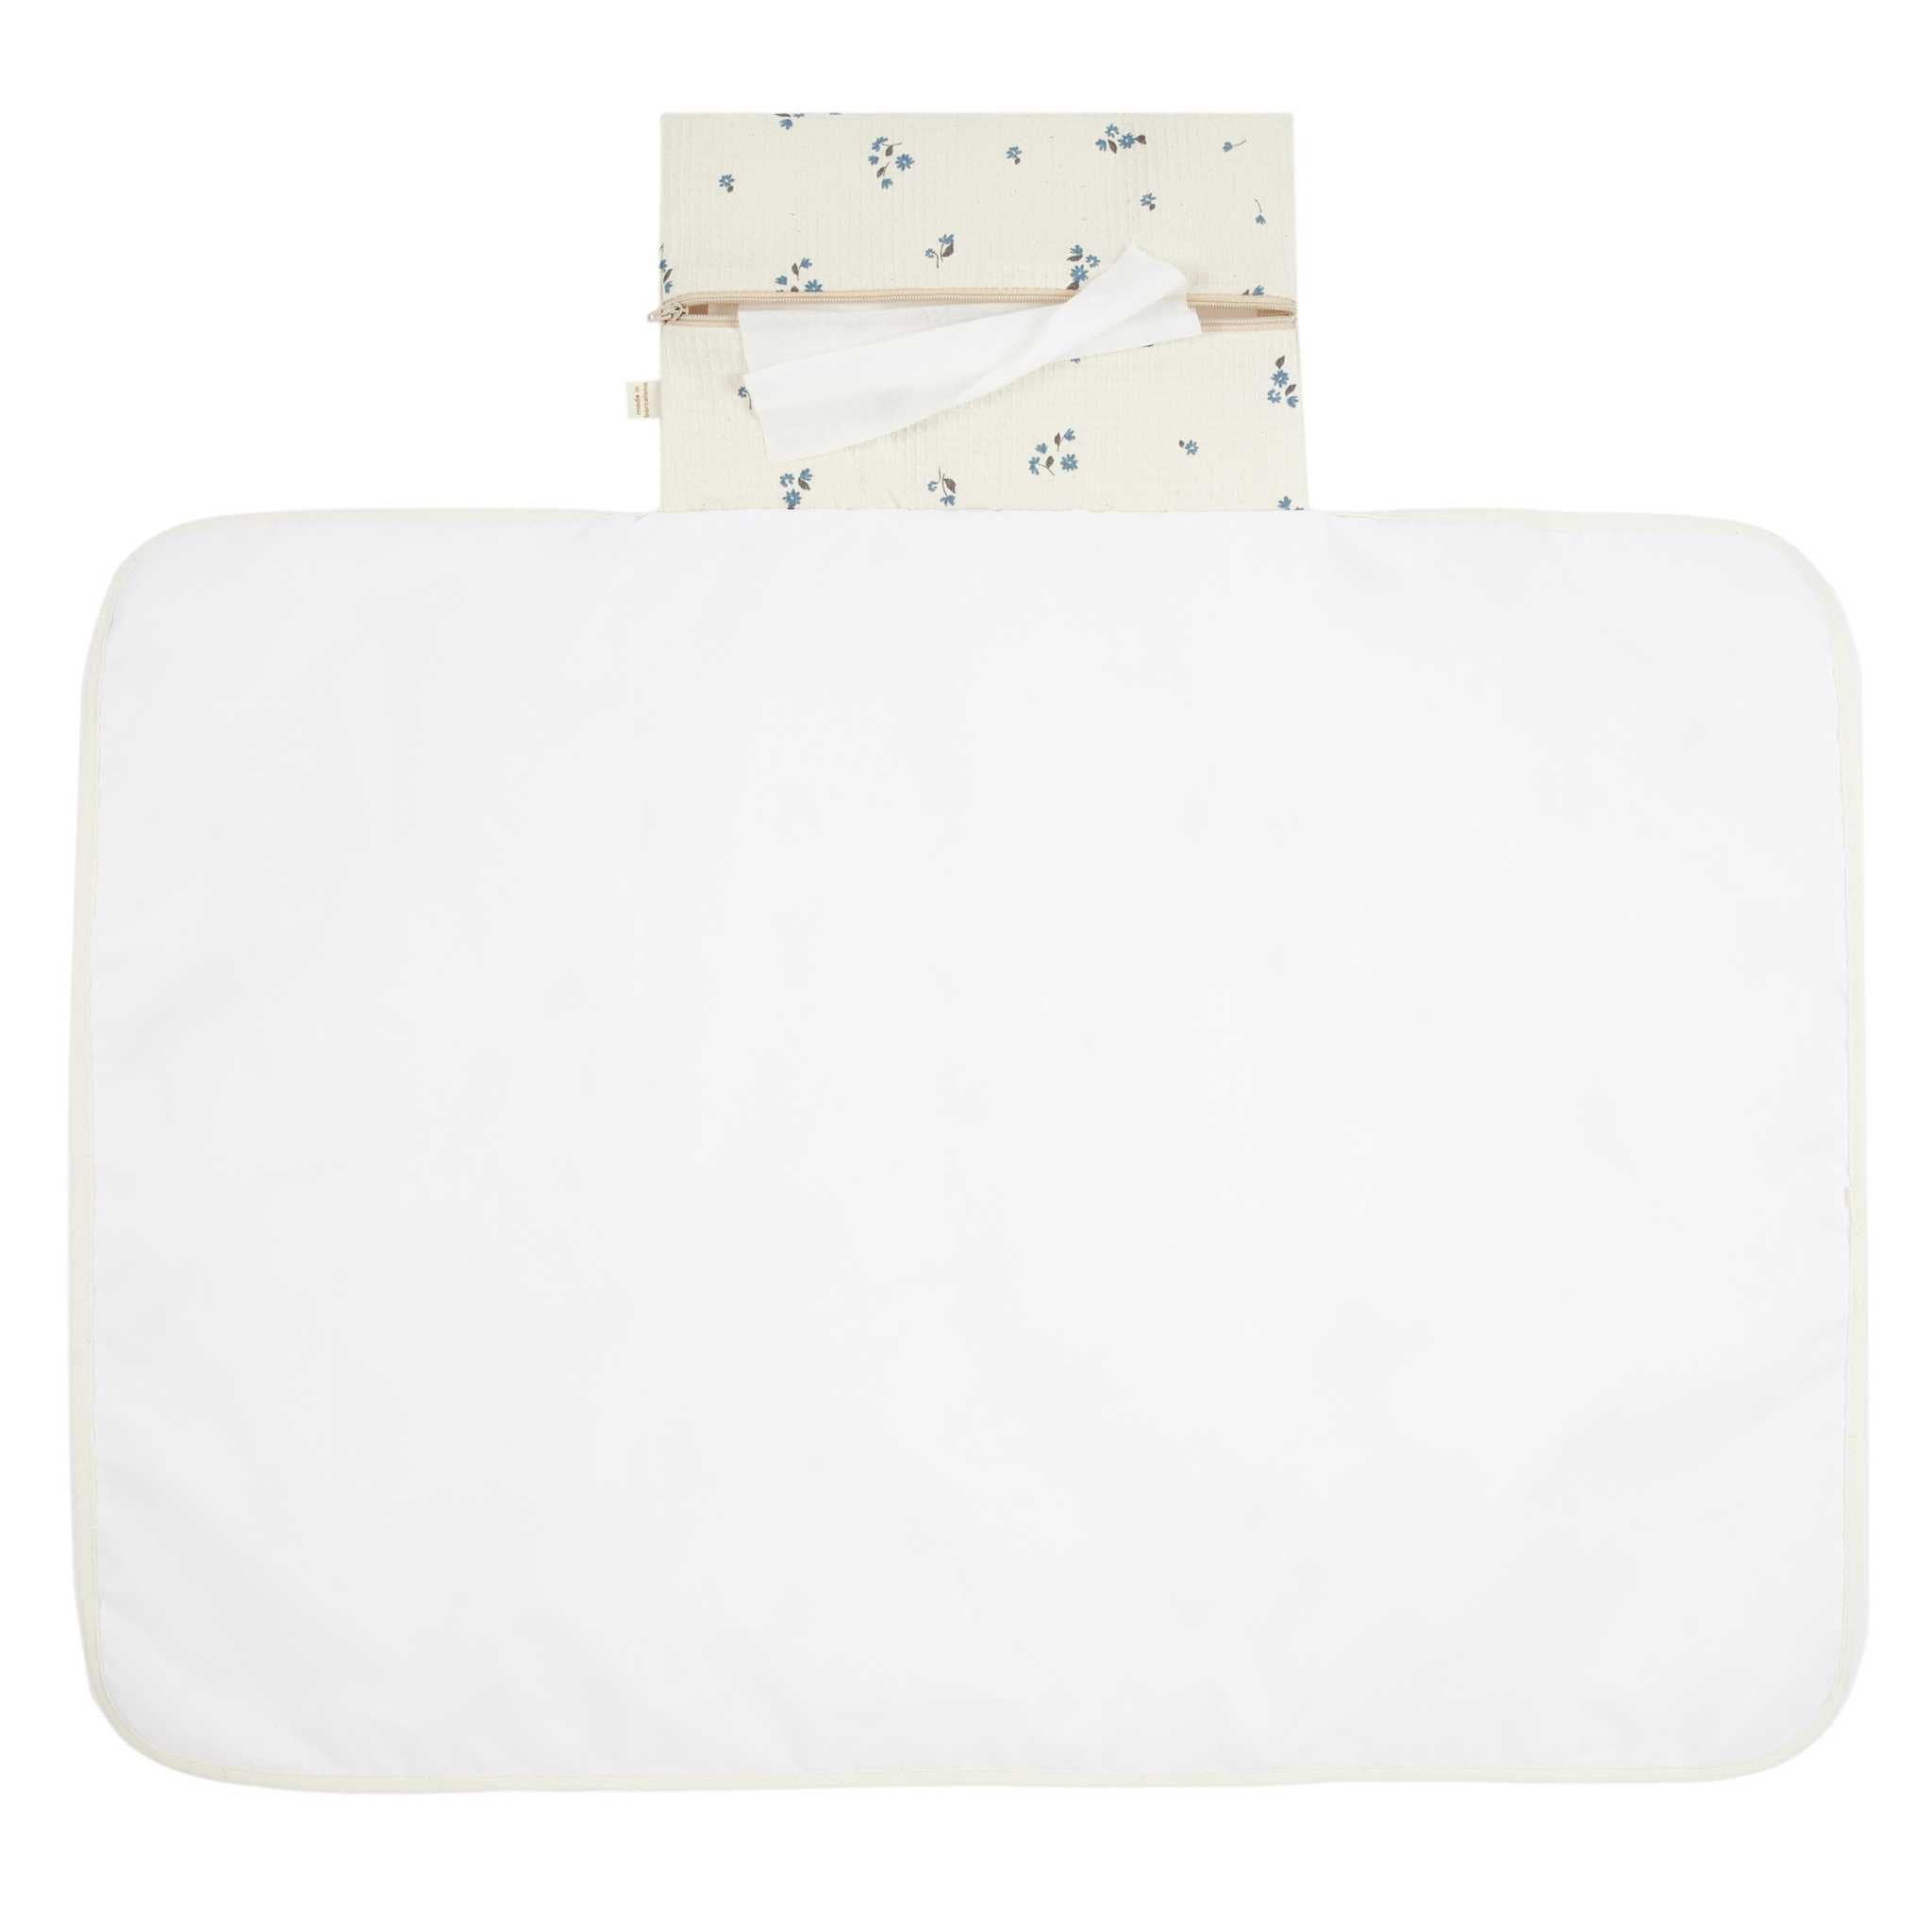 Nobodinoz Mozart Changing Pad in Lily Blue Opened Up